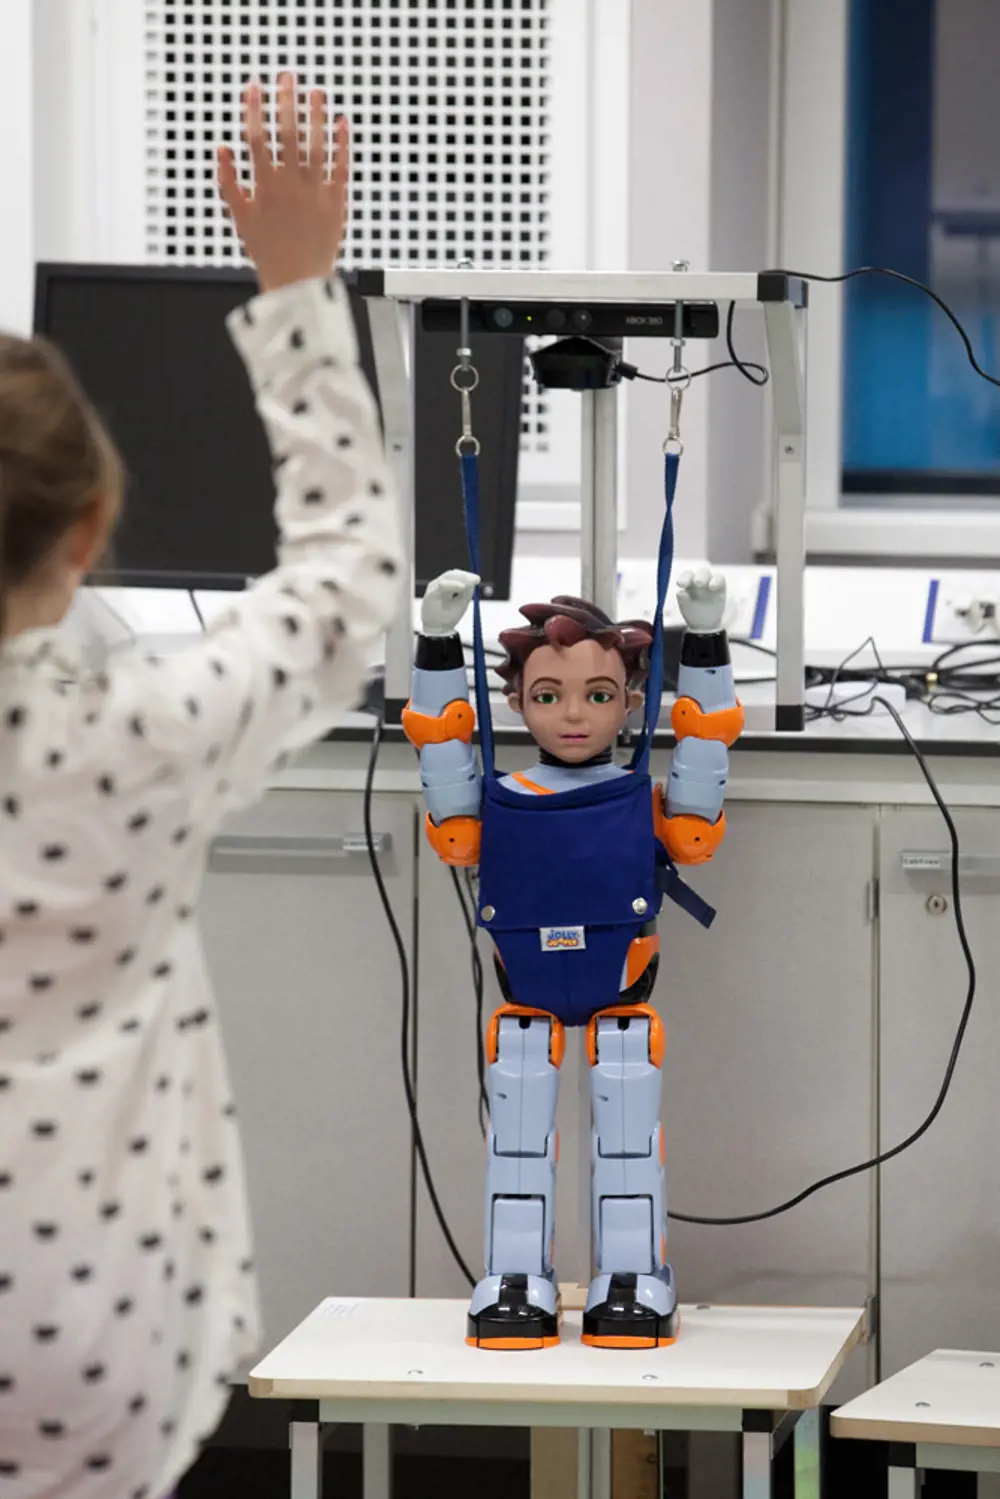 The American Zenorobot humanoid robot with its arms up, mimicking a human standing in front of it.